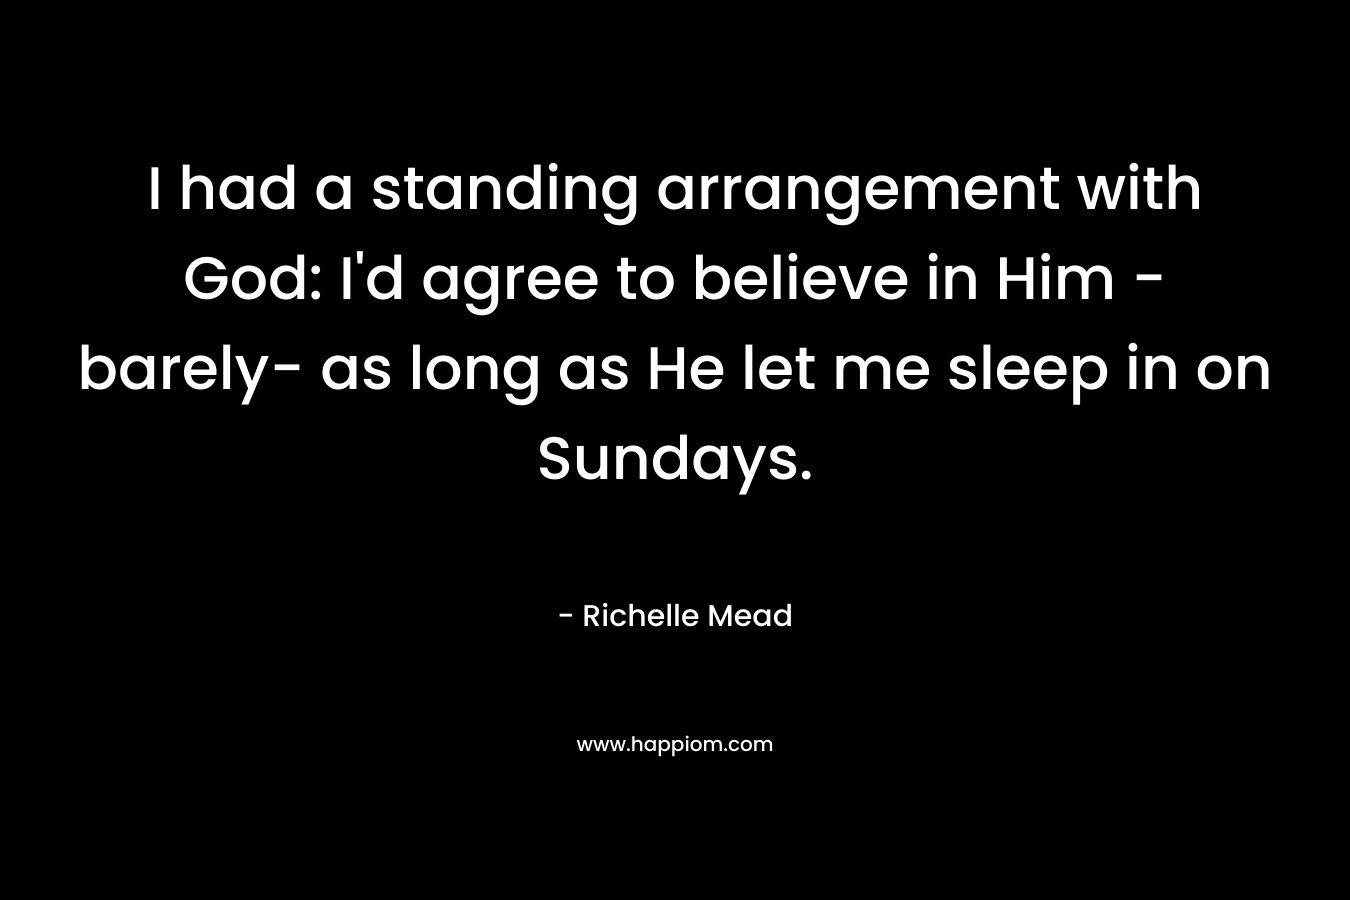 I had a standing arrangement with God: I’d agree to believe in Him -barely- as long as He let me sleep in on Sundays. – Richelle Mead